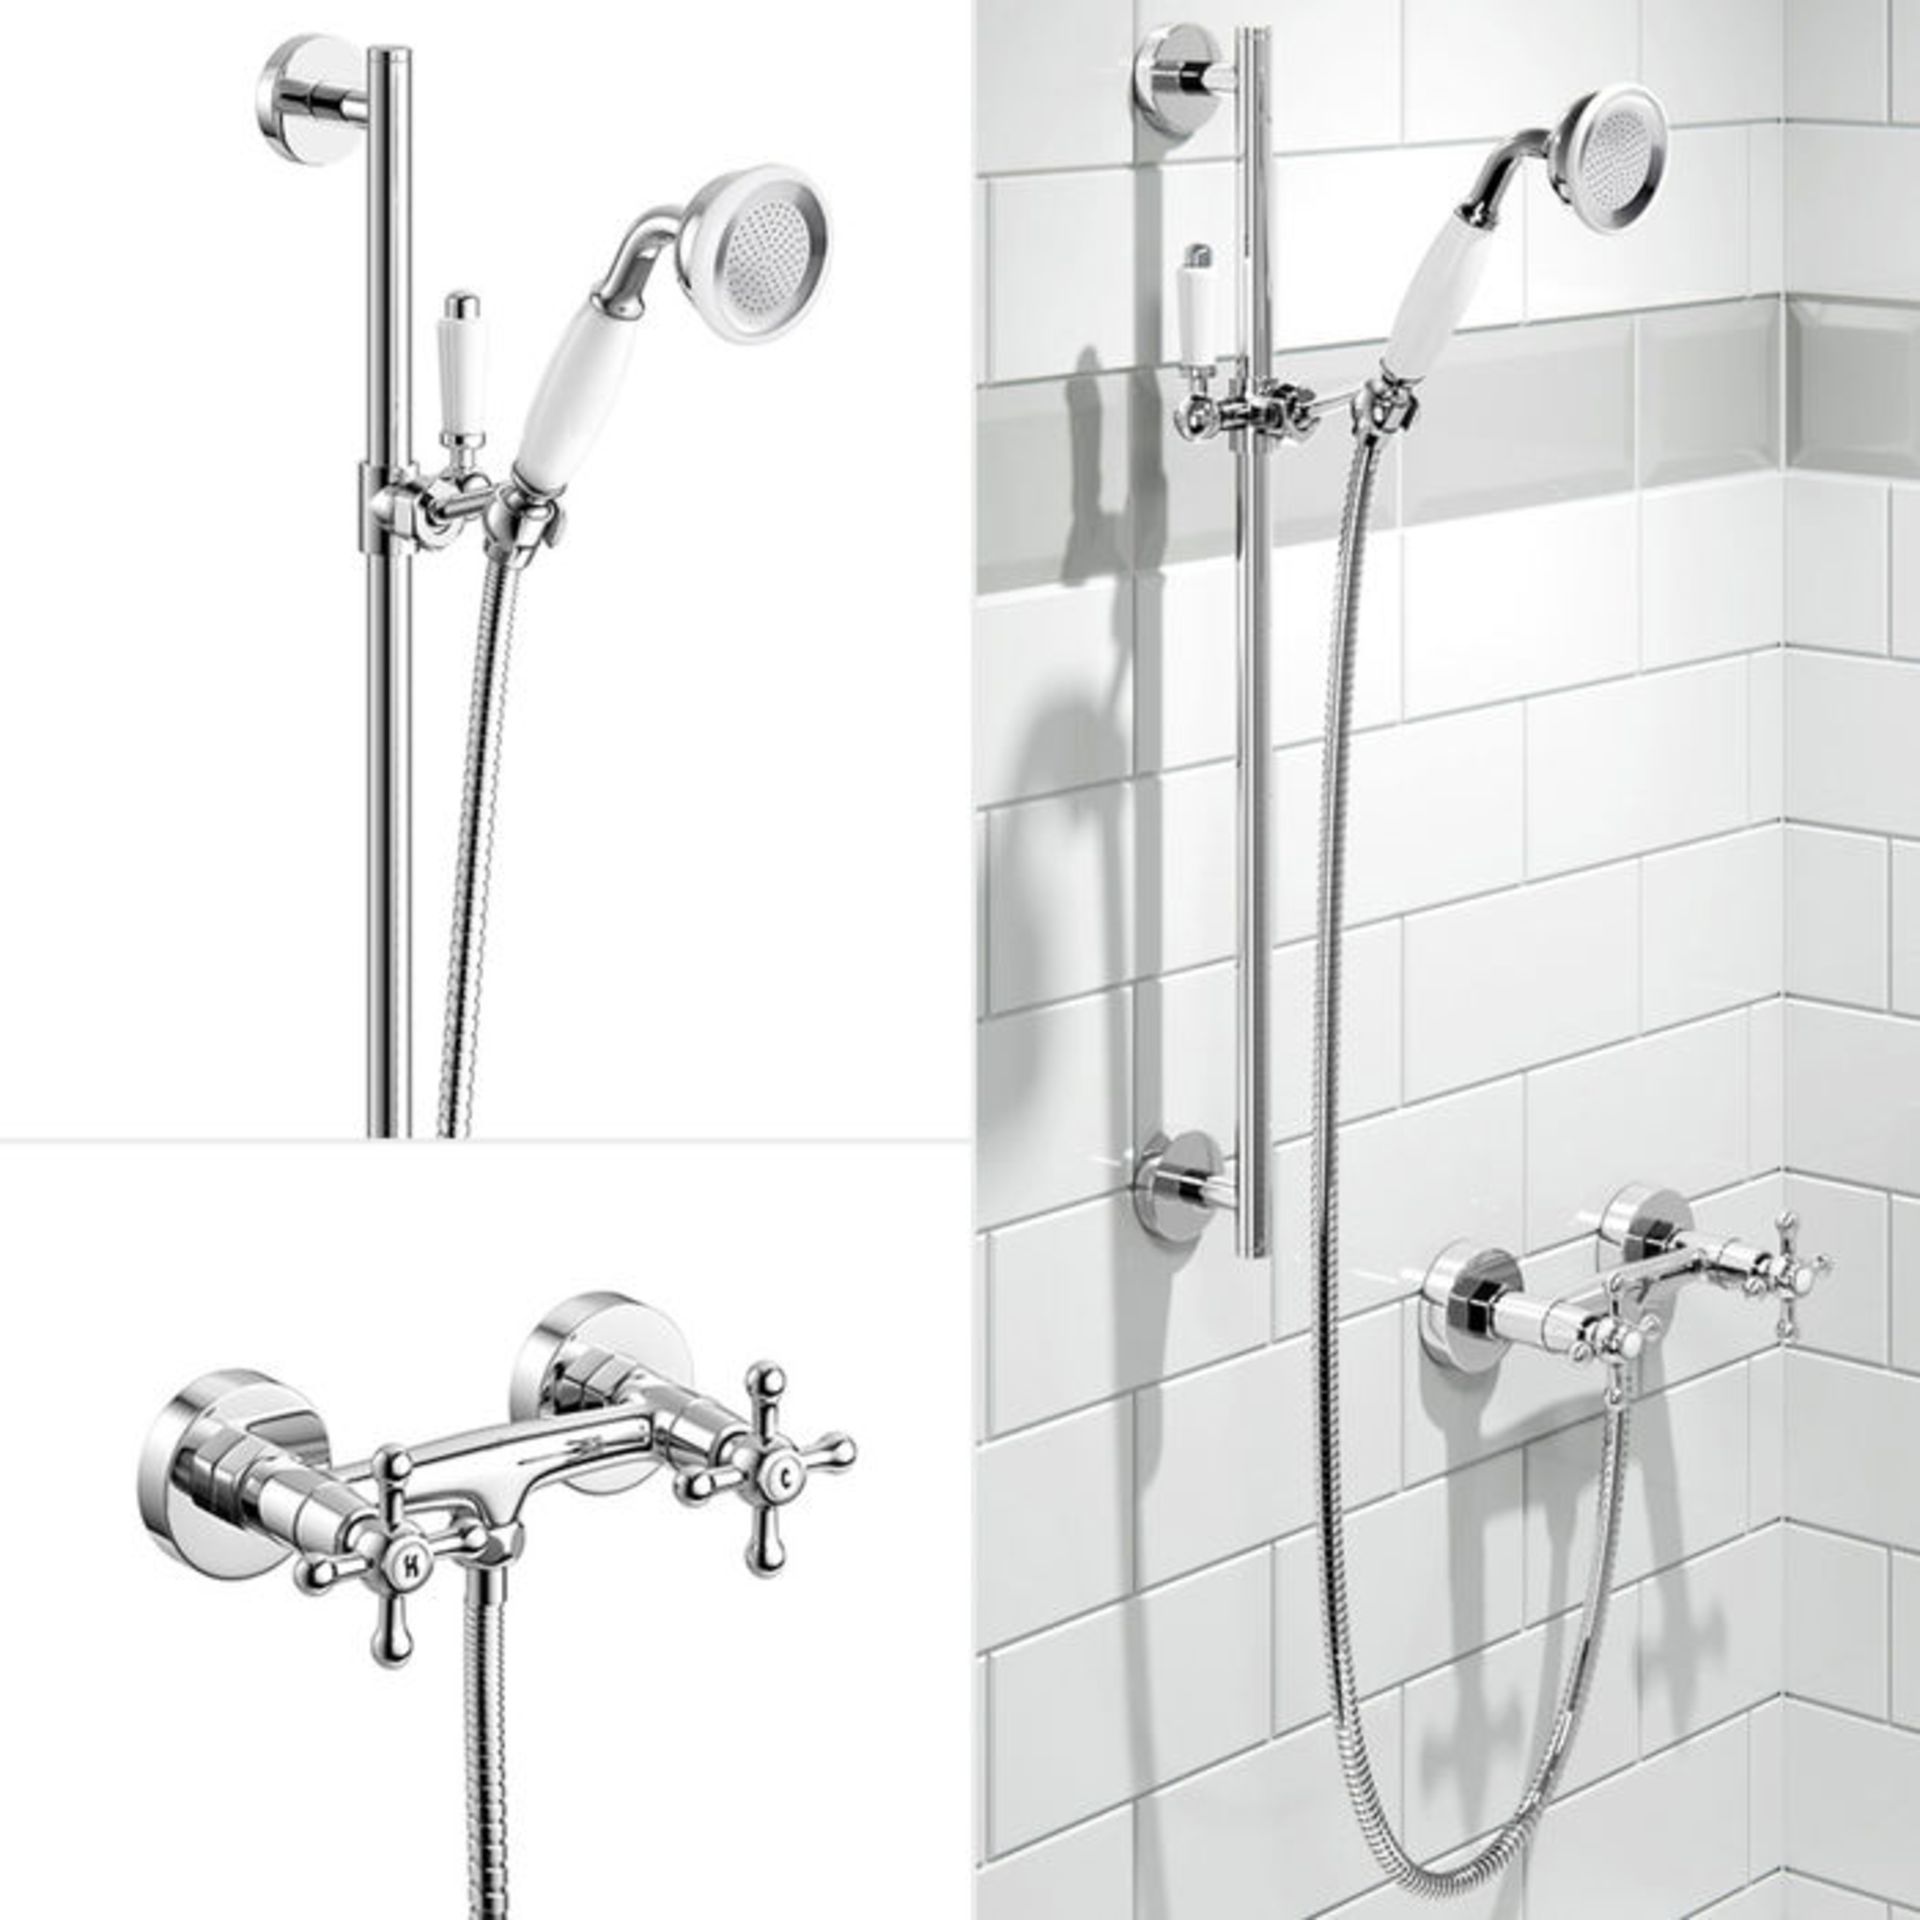 (CT226) Traditional Exposed Bar Mixer Kit Exposed design makes for a statement piece Traditional - Image 3 of 3